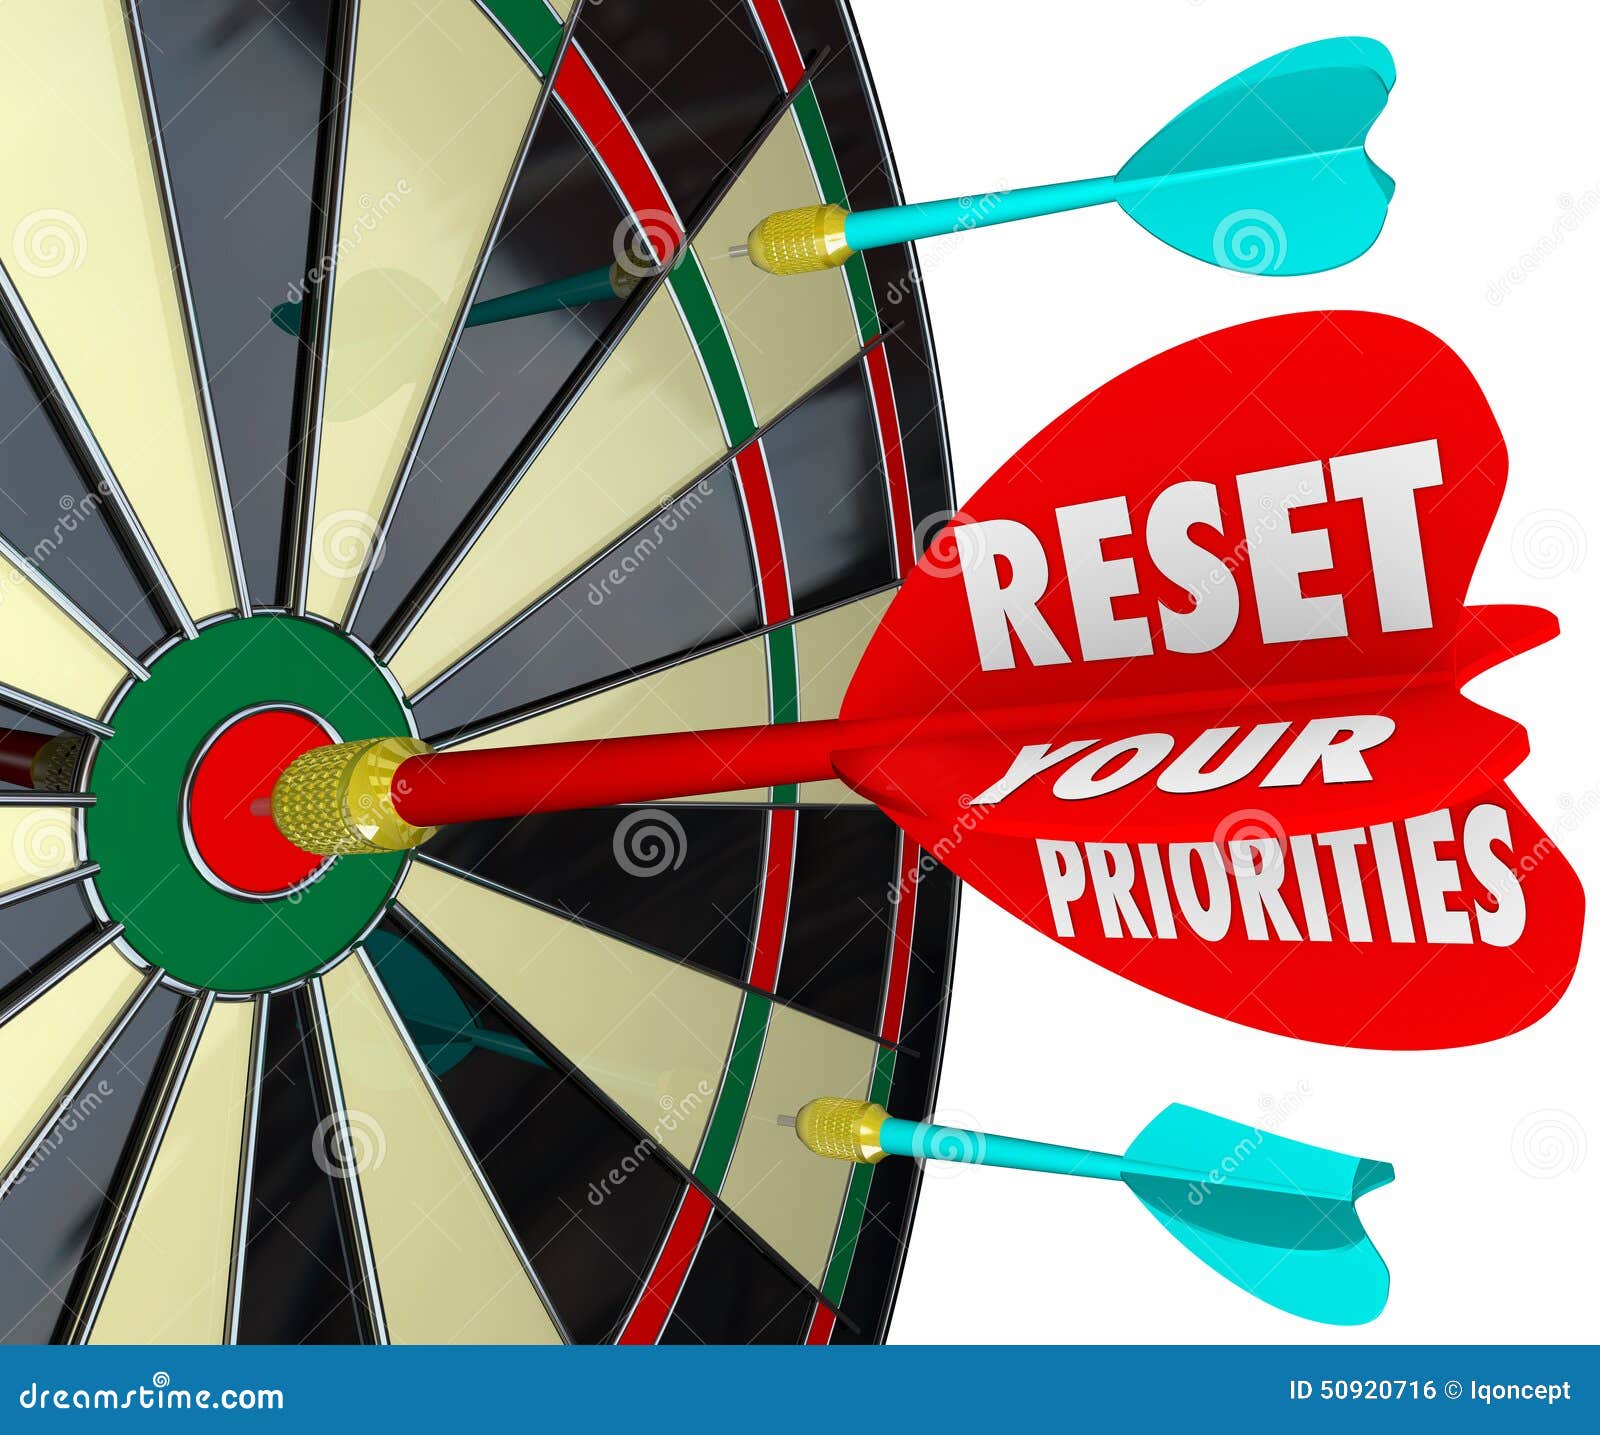 reset your priorities dart board changing order most important j